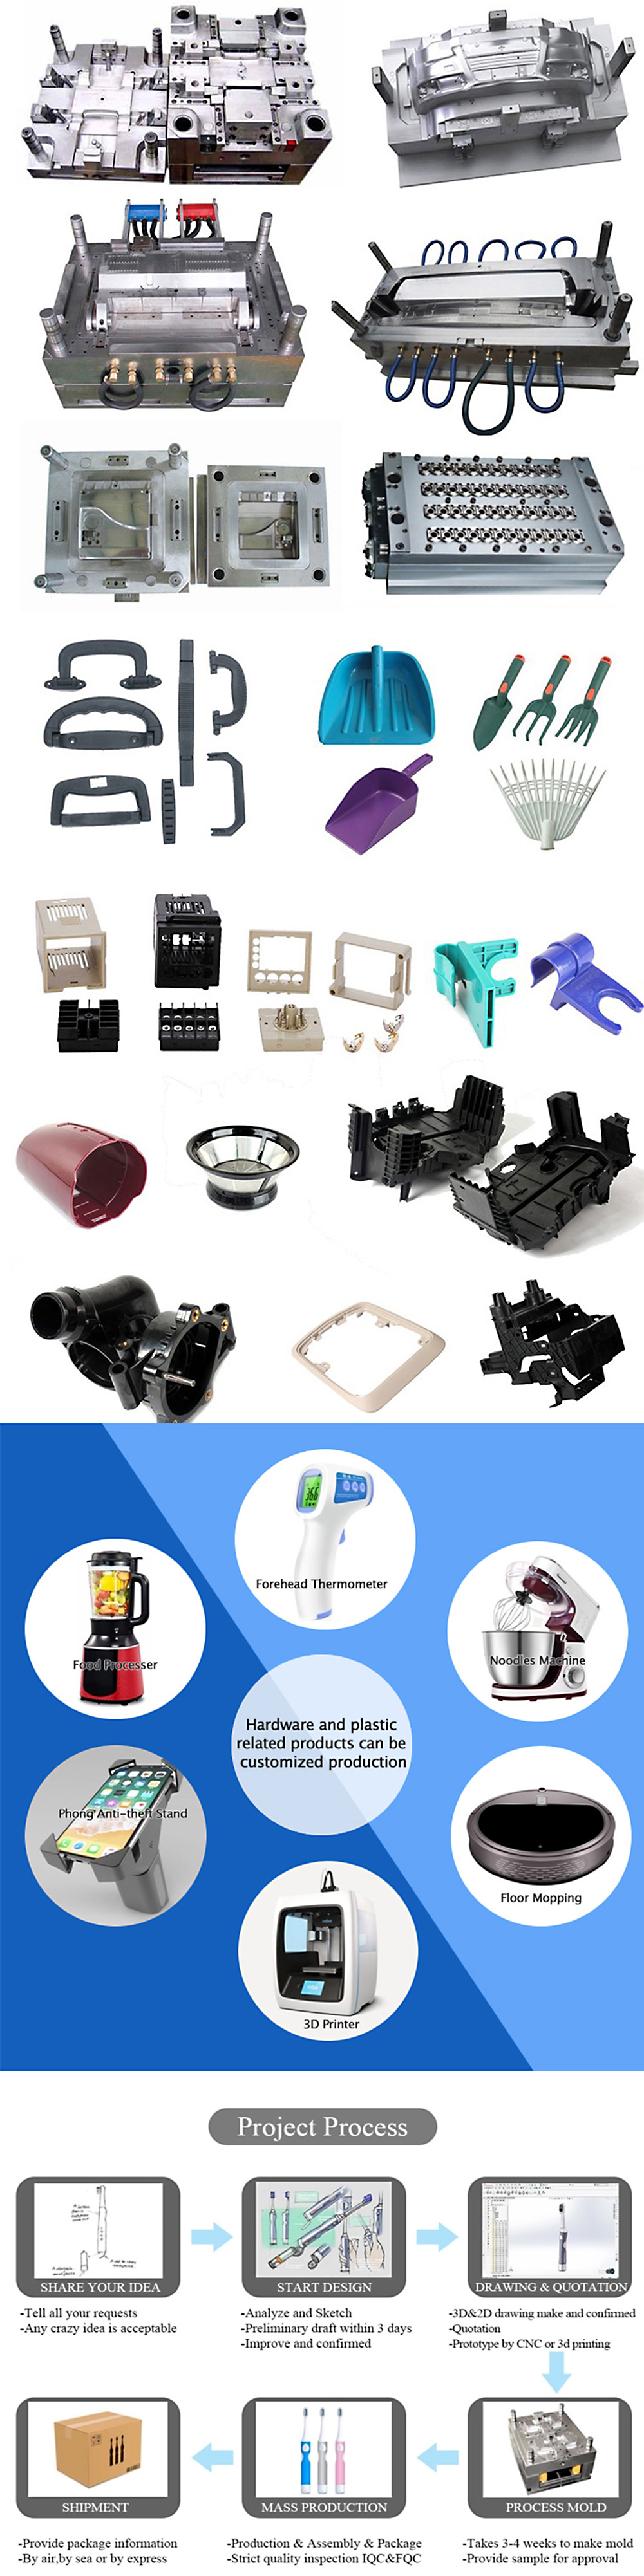 injection plastic moulds | manufacture injection mold | manufacture mold